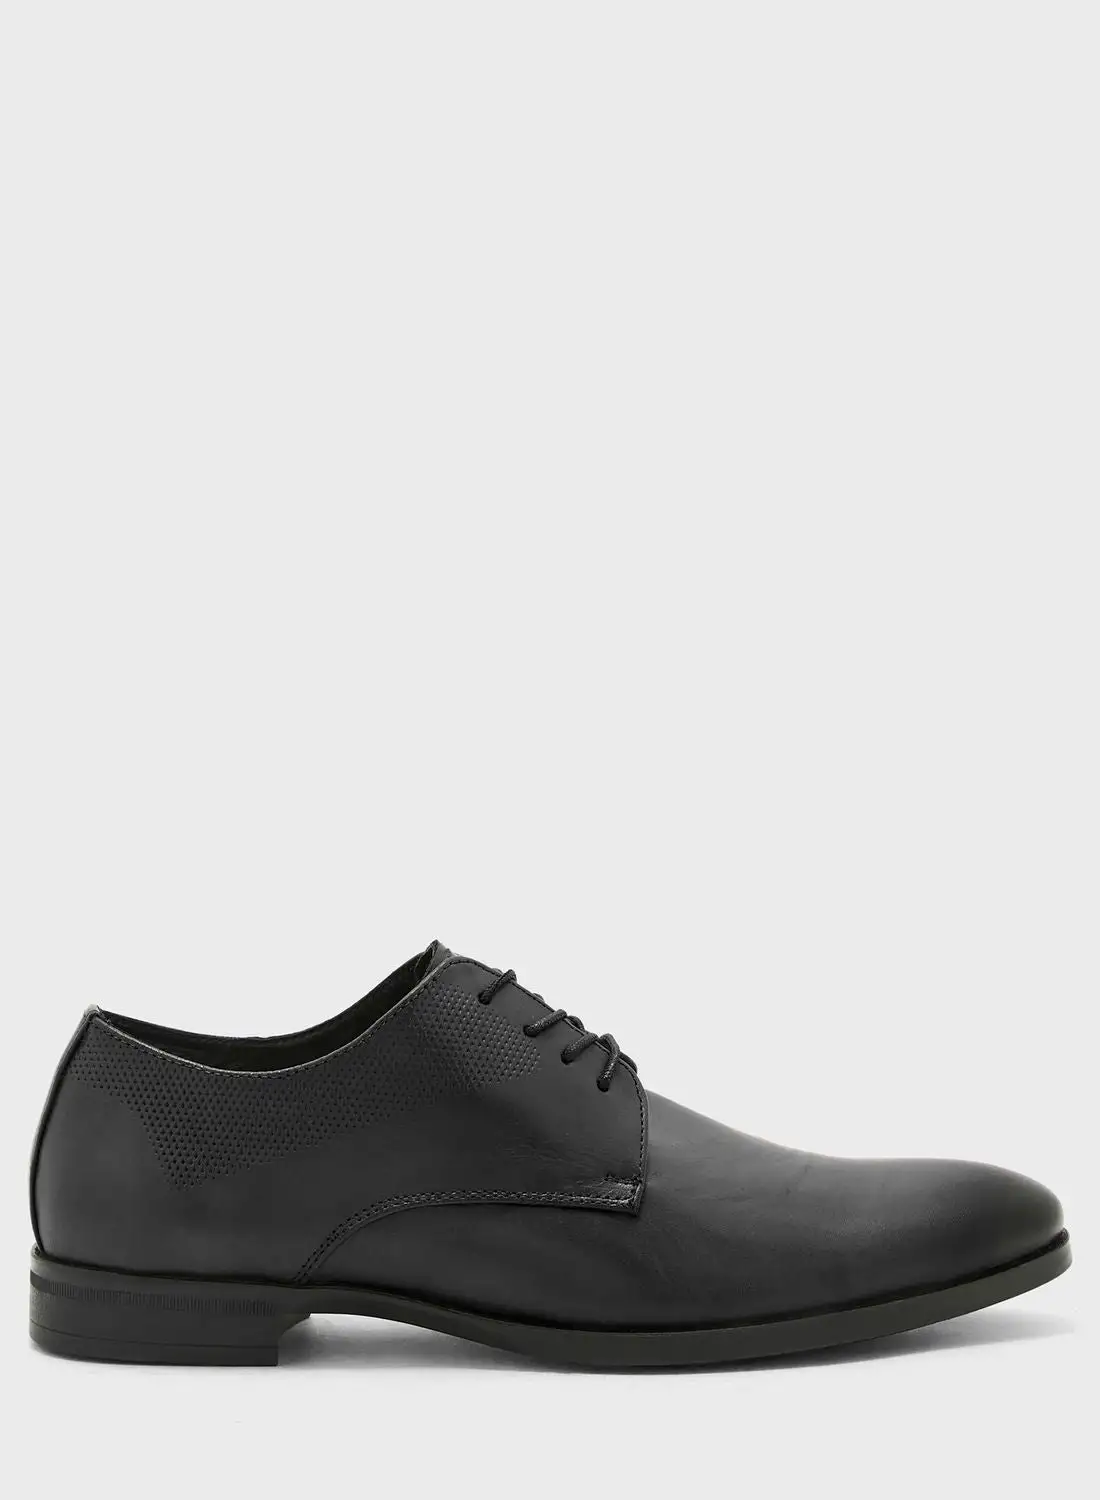 Robert Wood Genuine Leather Formal Lace Ups